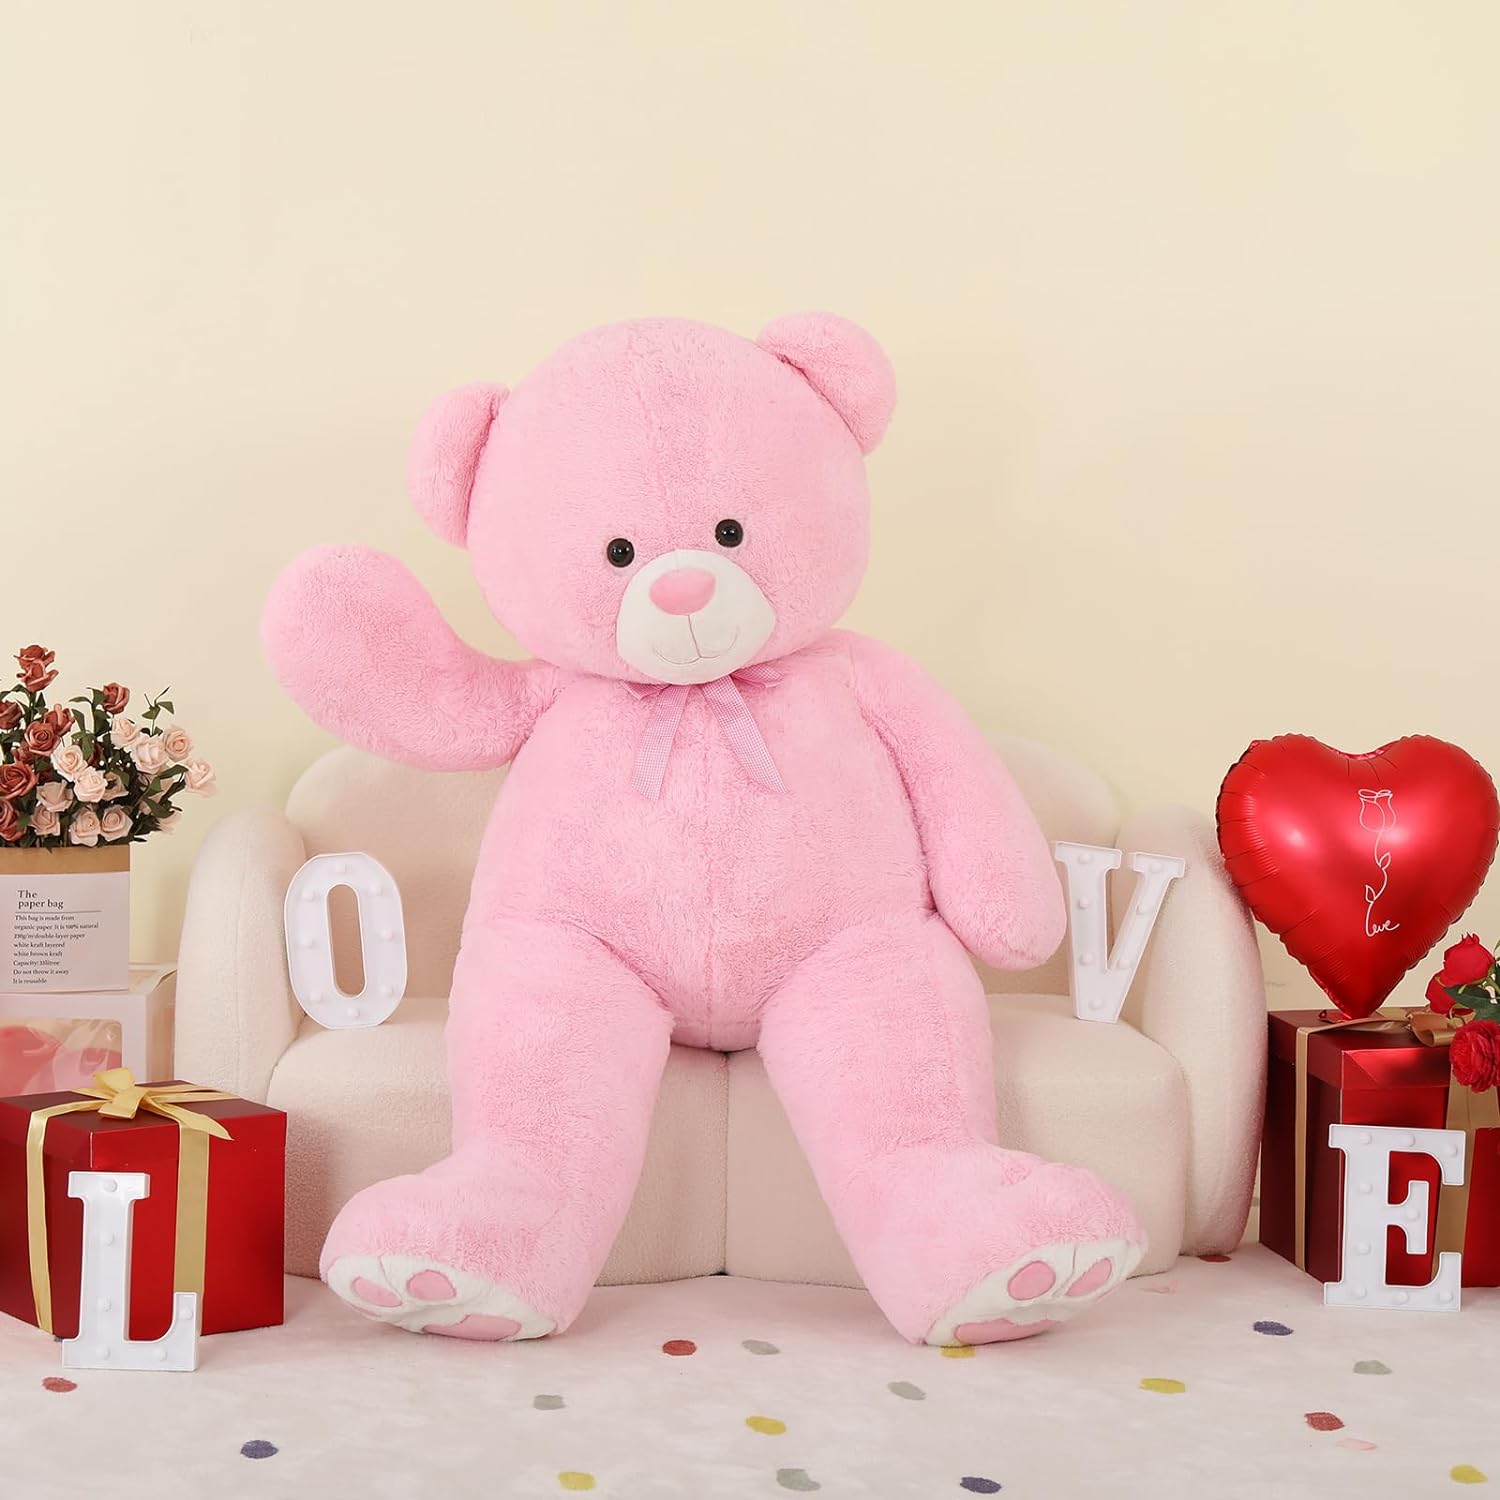 Giant Teddy Bear Plush Toy, Pink/Light Brown/White, 43/55 Inches